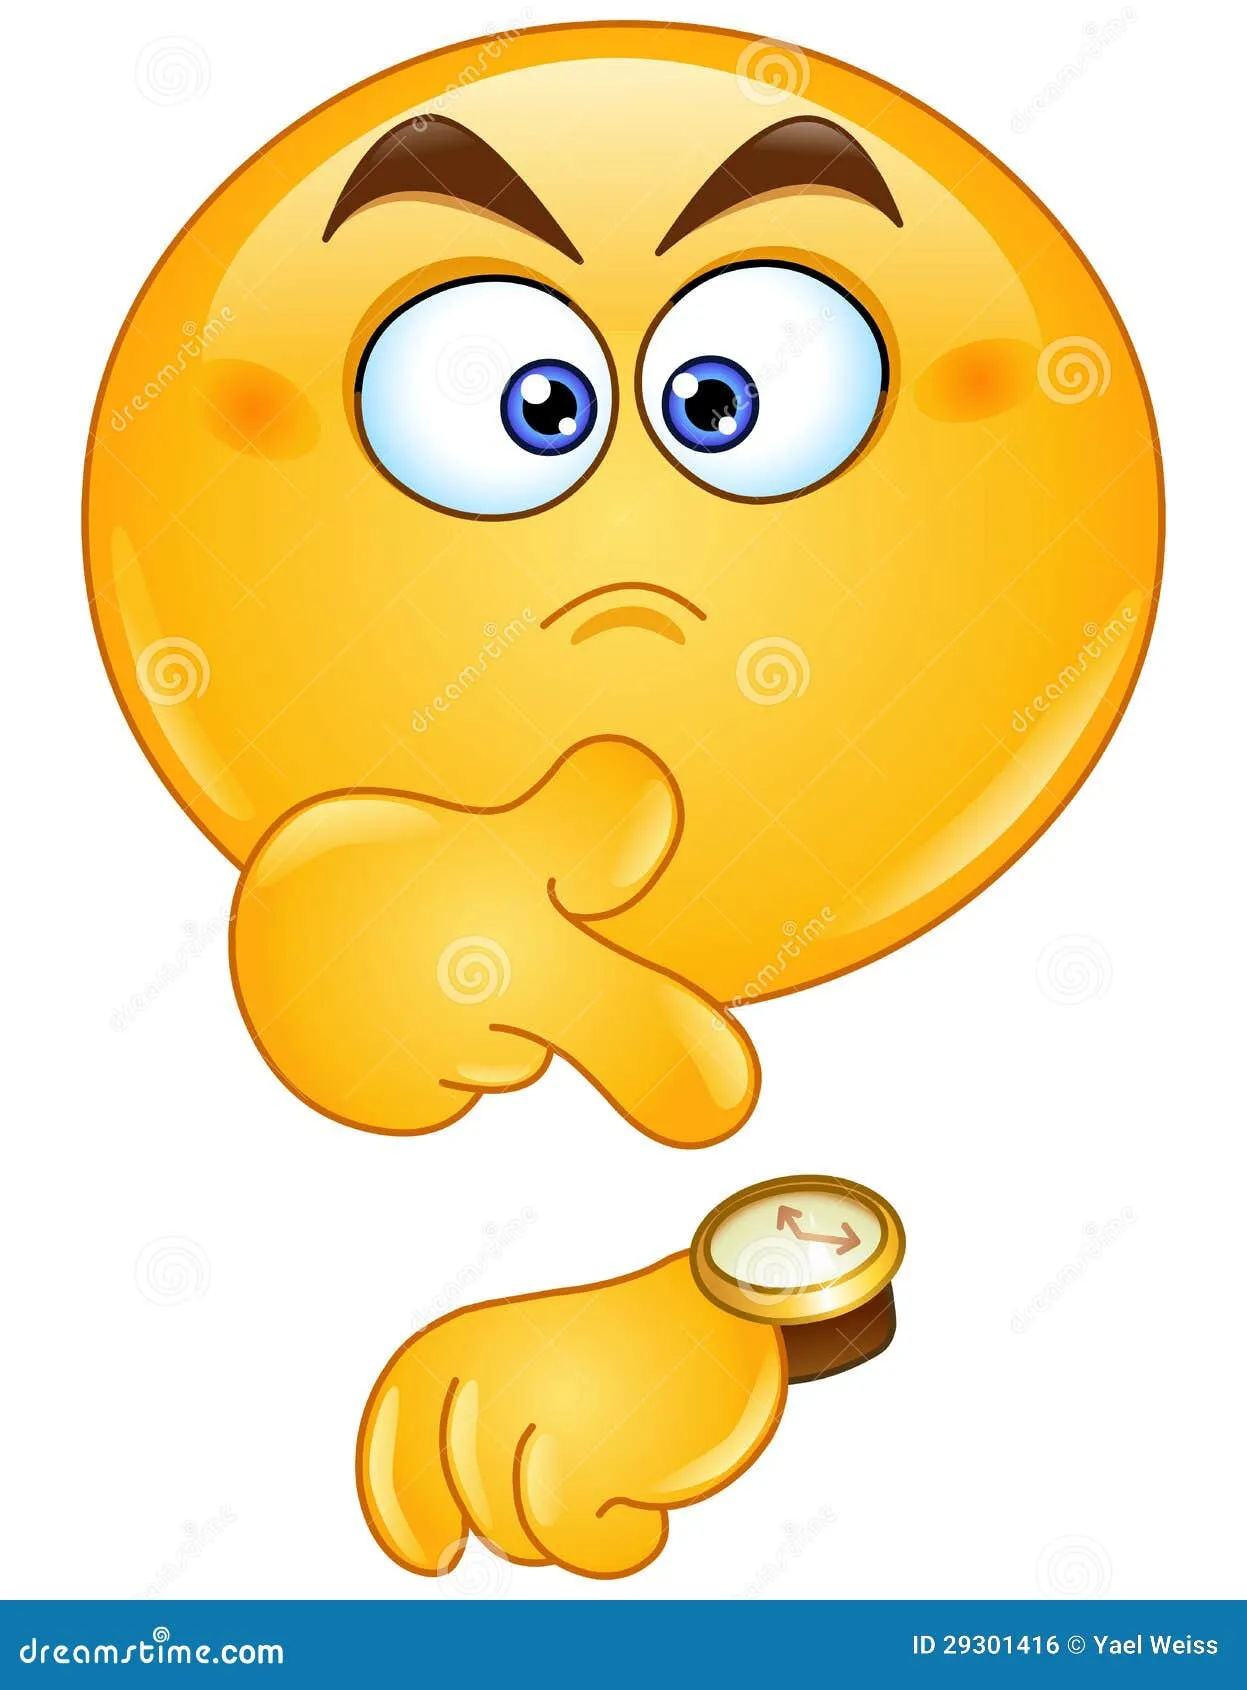 Pointing At Watch Emoticon Royalty Free Stock Image - Image: 29301416